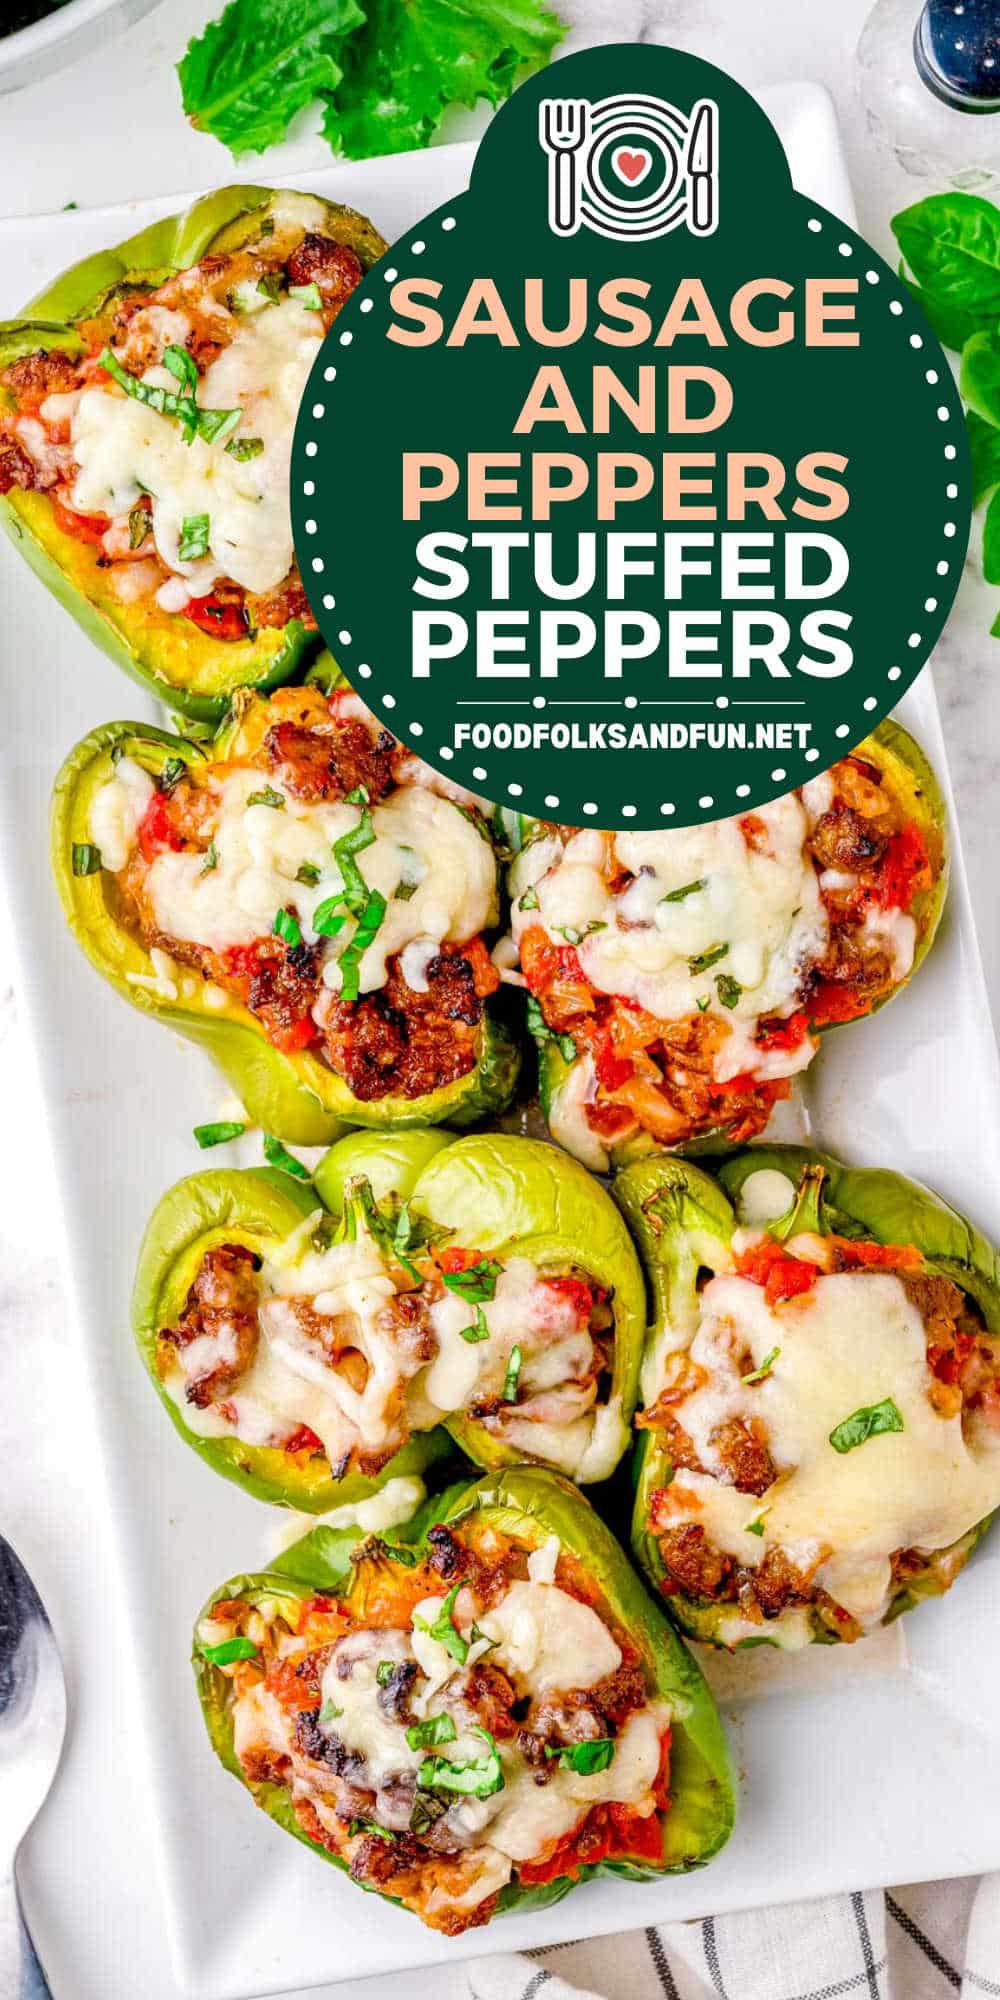 Sausage and Peppers are one of my favorite combinations. I love 'em on a fresh grinder roll, in pasta, lasagna, and lately in this Sausage Stuffed Peppers recipe!  via @foodfolksandfun